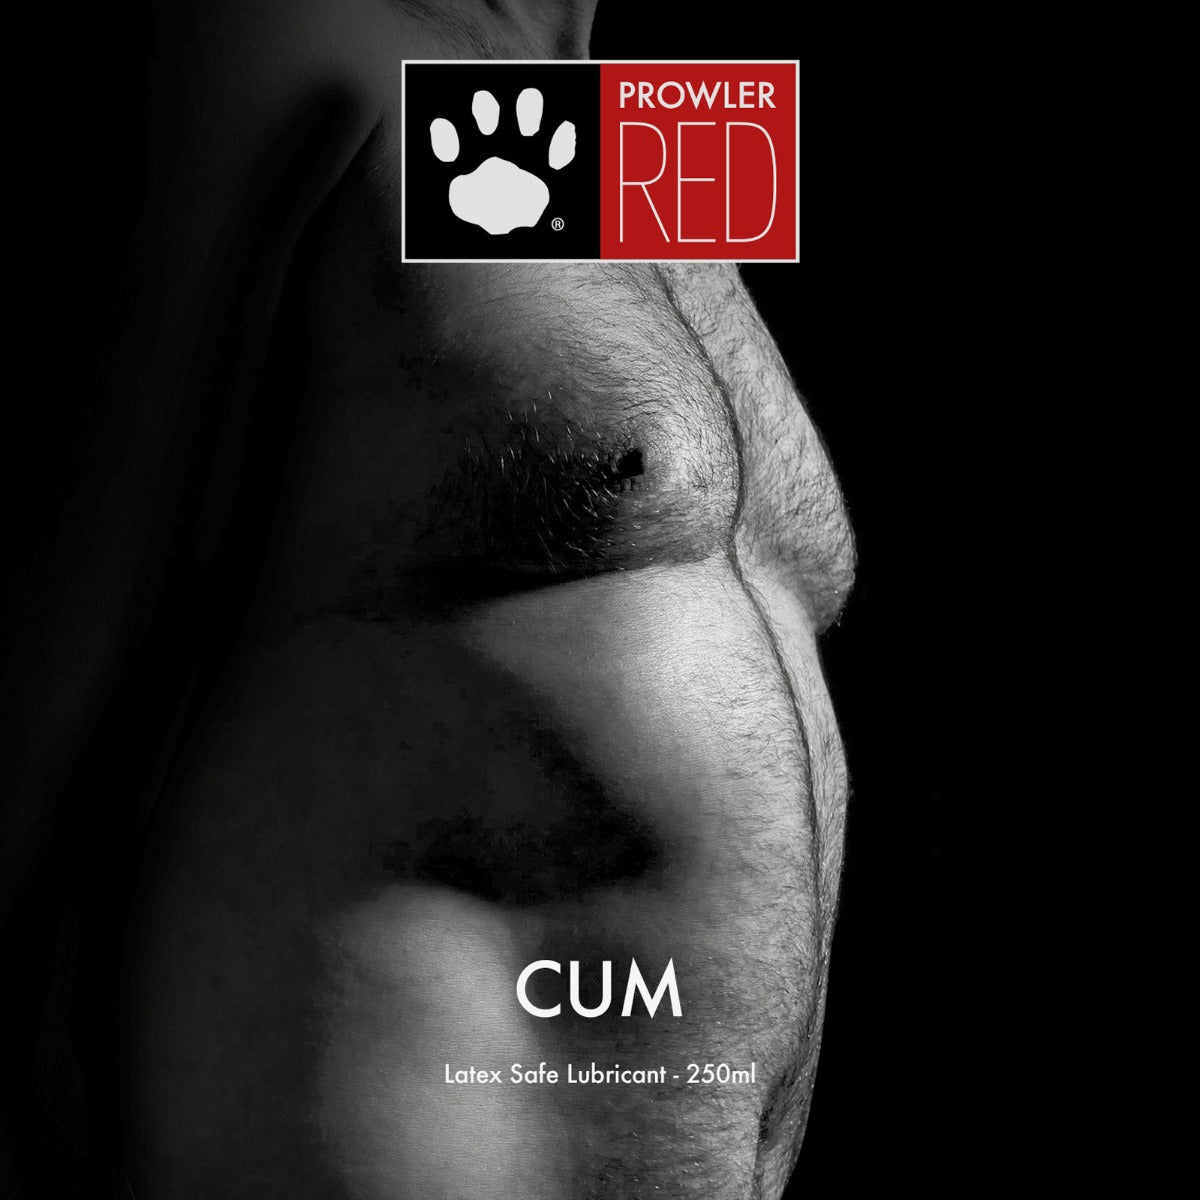 Prowler RED Cum Water-based Lube (7021005308068)